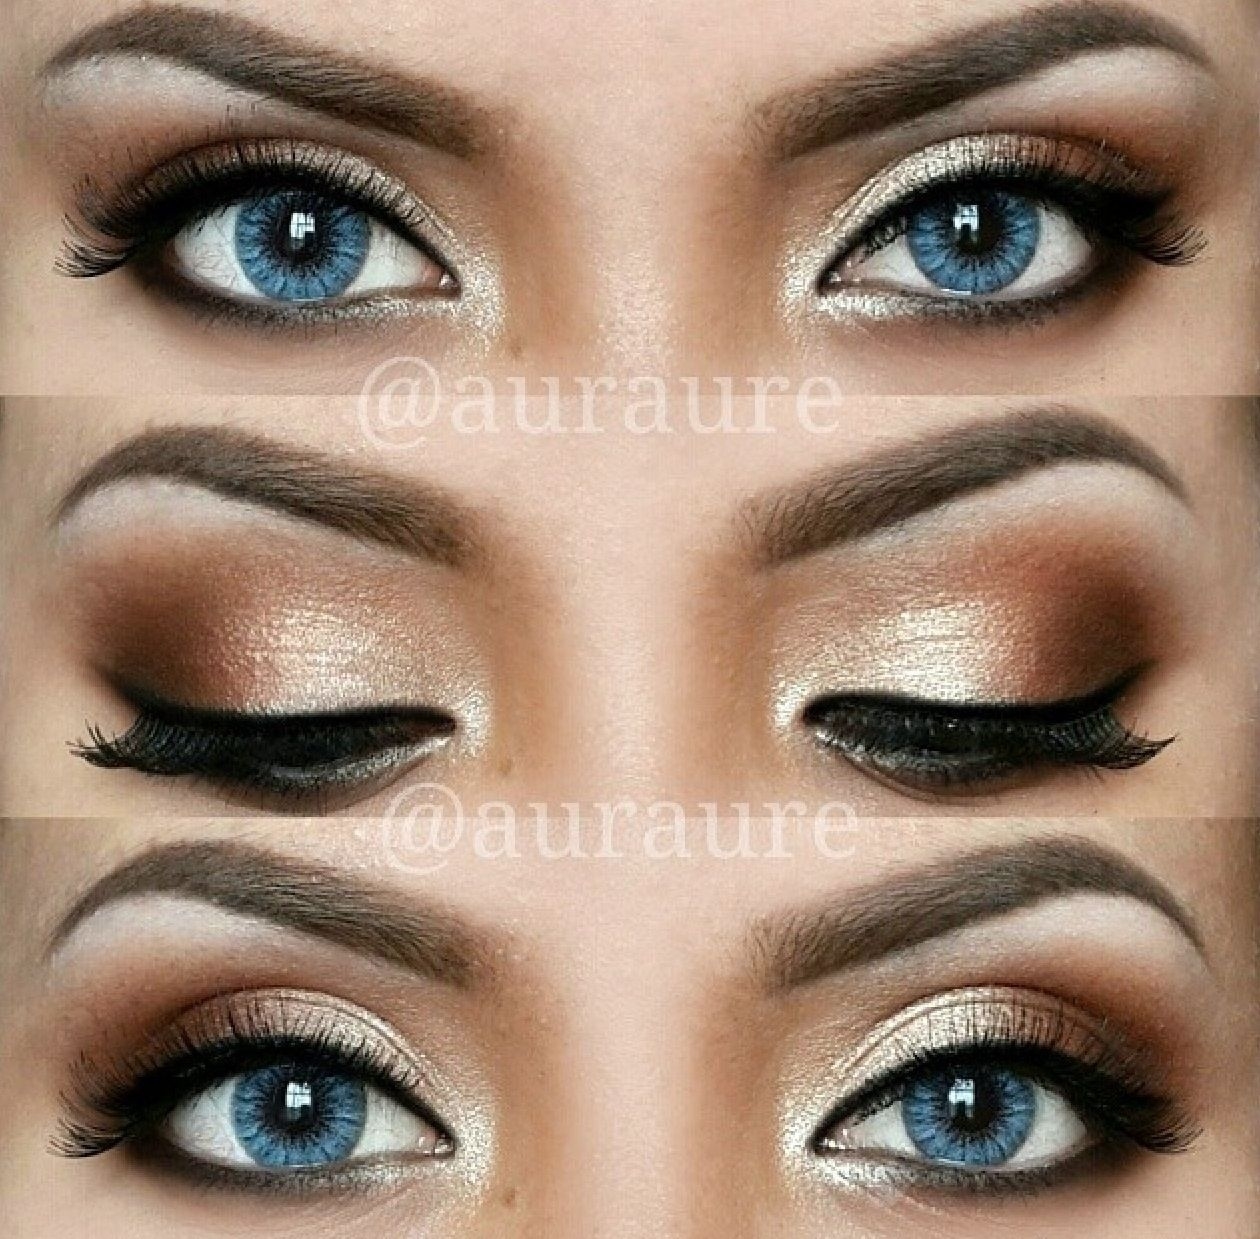 12 Amazing Makeup Ideas For Prom, Or Any Fancy Occasion! @auraure Is in Makeup Ideas For Blue Eyes For Prom